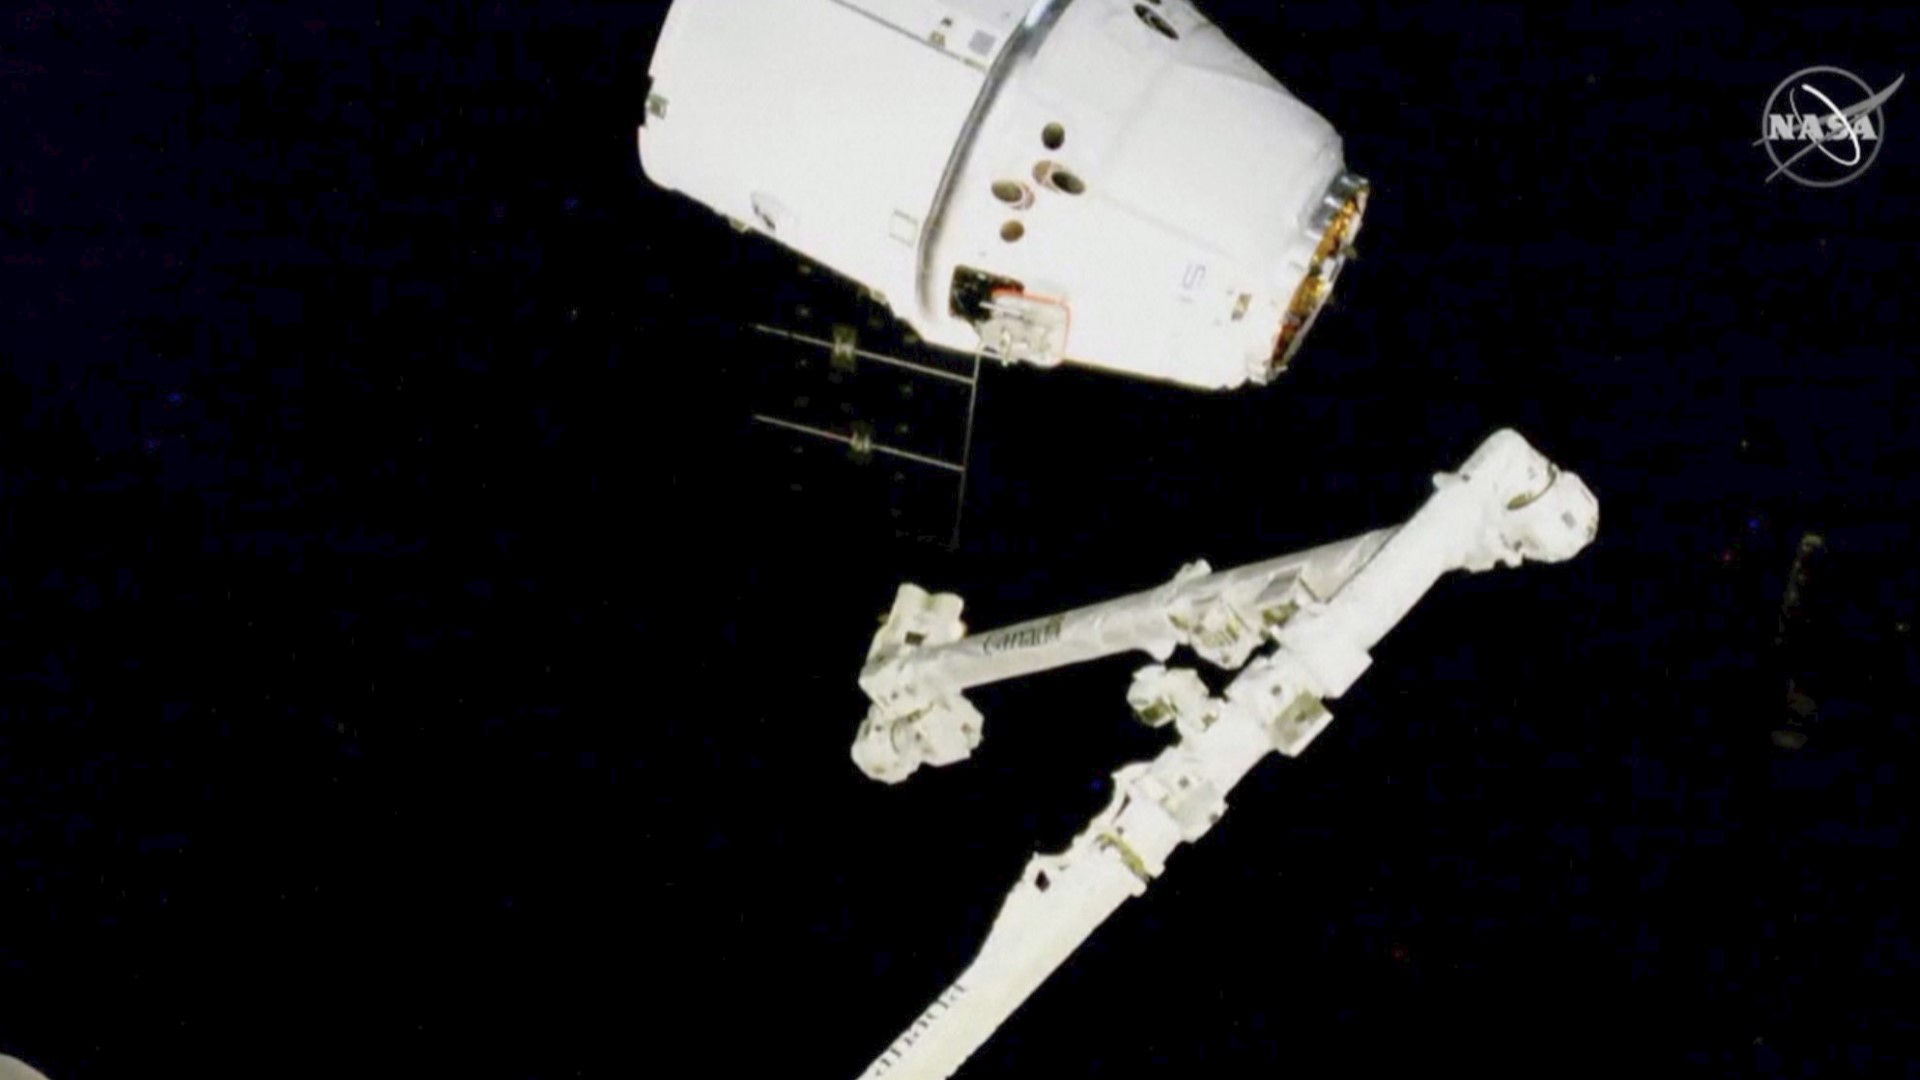 For the last scheduled time, the International Space Station used a robotic arm to capture a cargo haul from SpaceX. Veuer's Justin Kircher has the story.